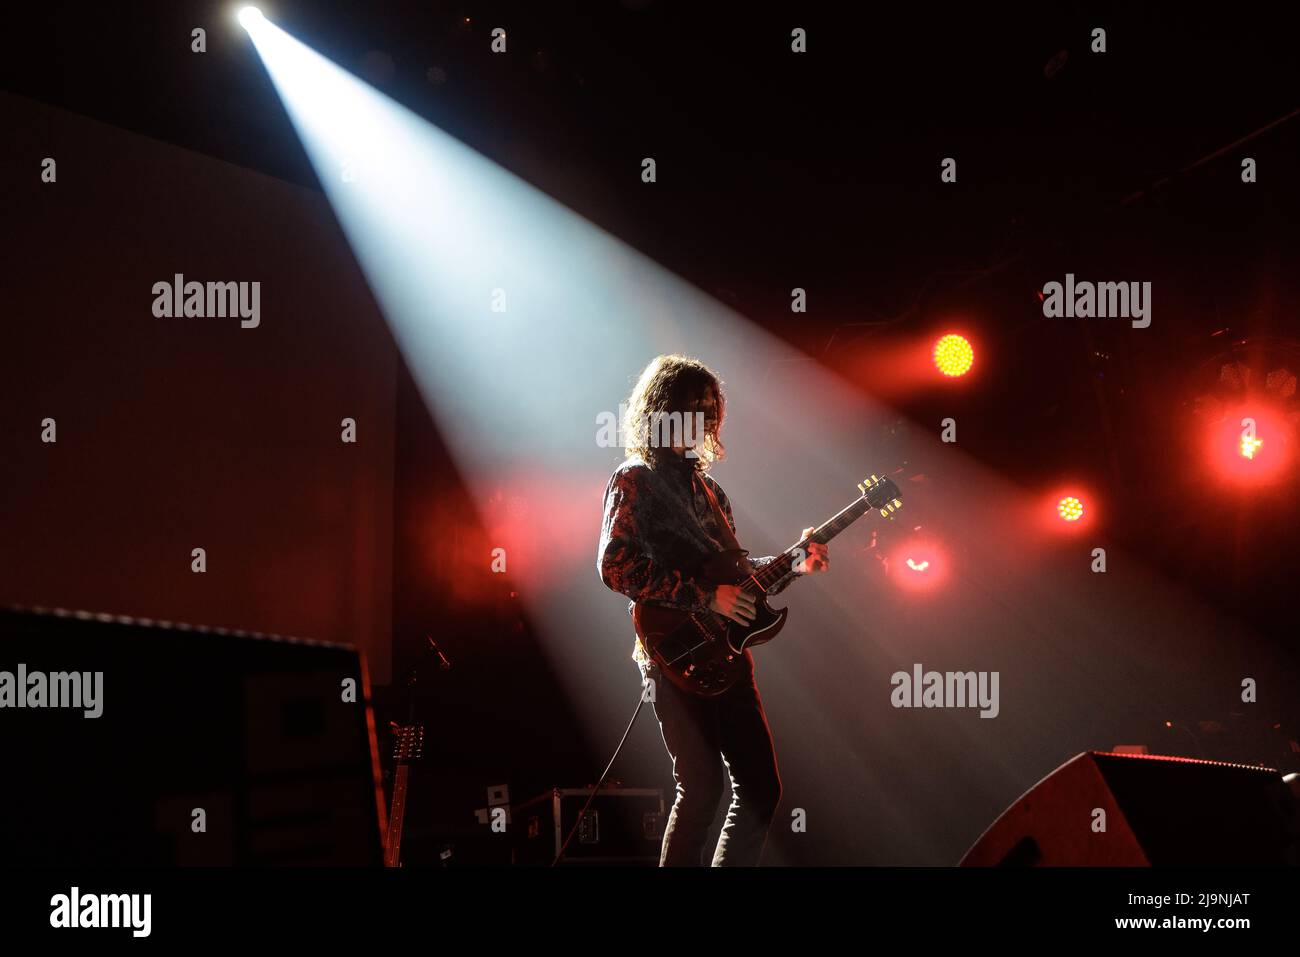 Tilburg, Netherlands. 21st, April 2022. The Italian doom metal band Messa performs a live concert during the Dutch music festival Roadburn Festival 2022 in Tilburg. Here guitarist Alberto Piccolo is seen live on stage. (Photo credit: Gonzales Photo - Peter Troest). Stock Photo